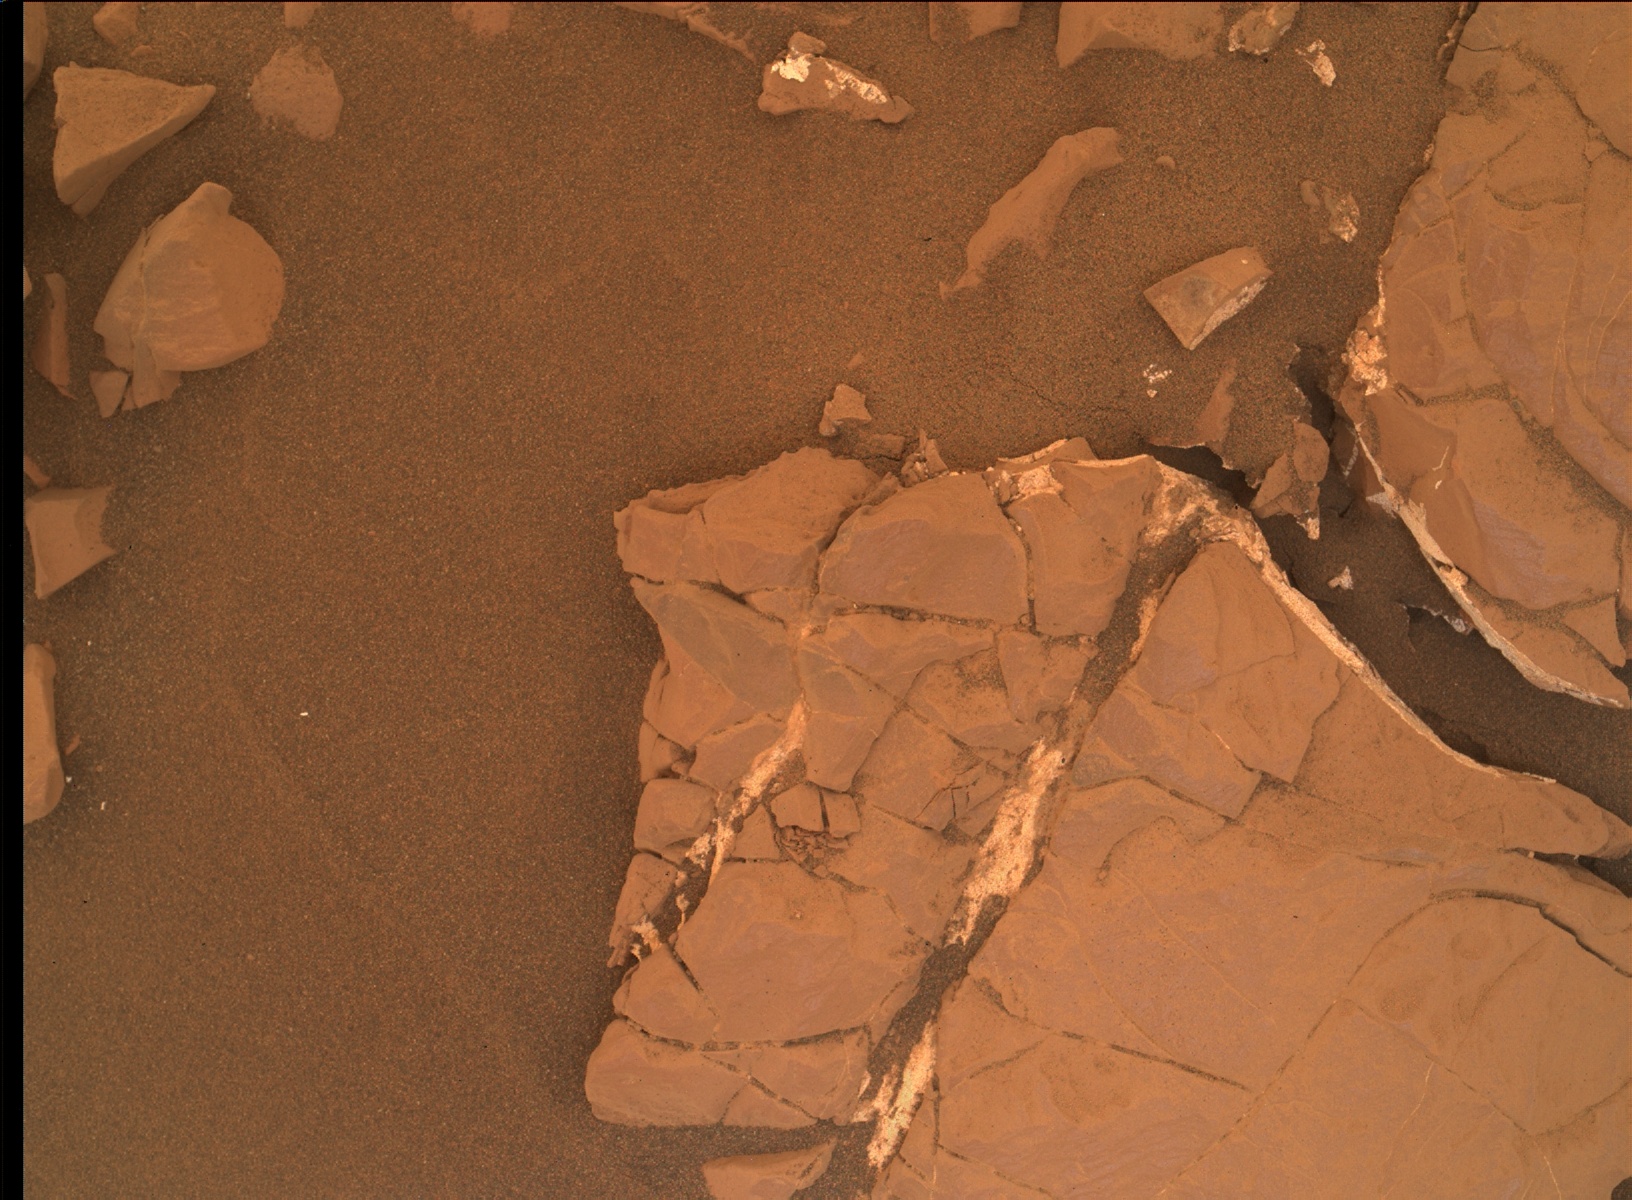 Nasa's Mars rover Curiosity acquired this image using its Mars Hand Lens Imager (MAHLI) on Sol 2108